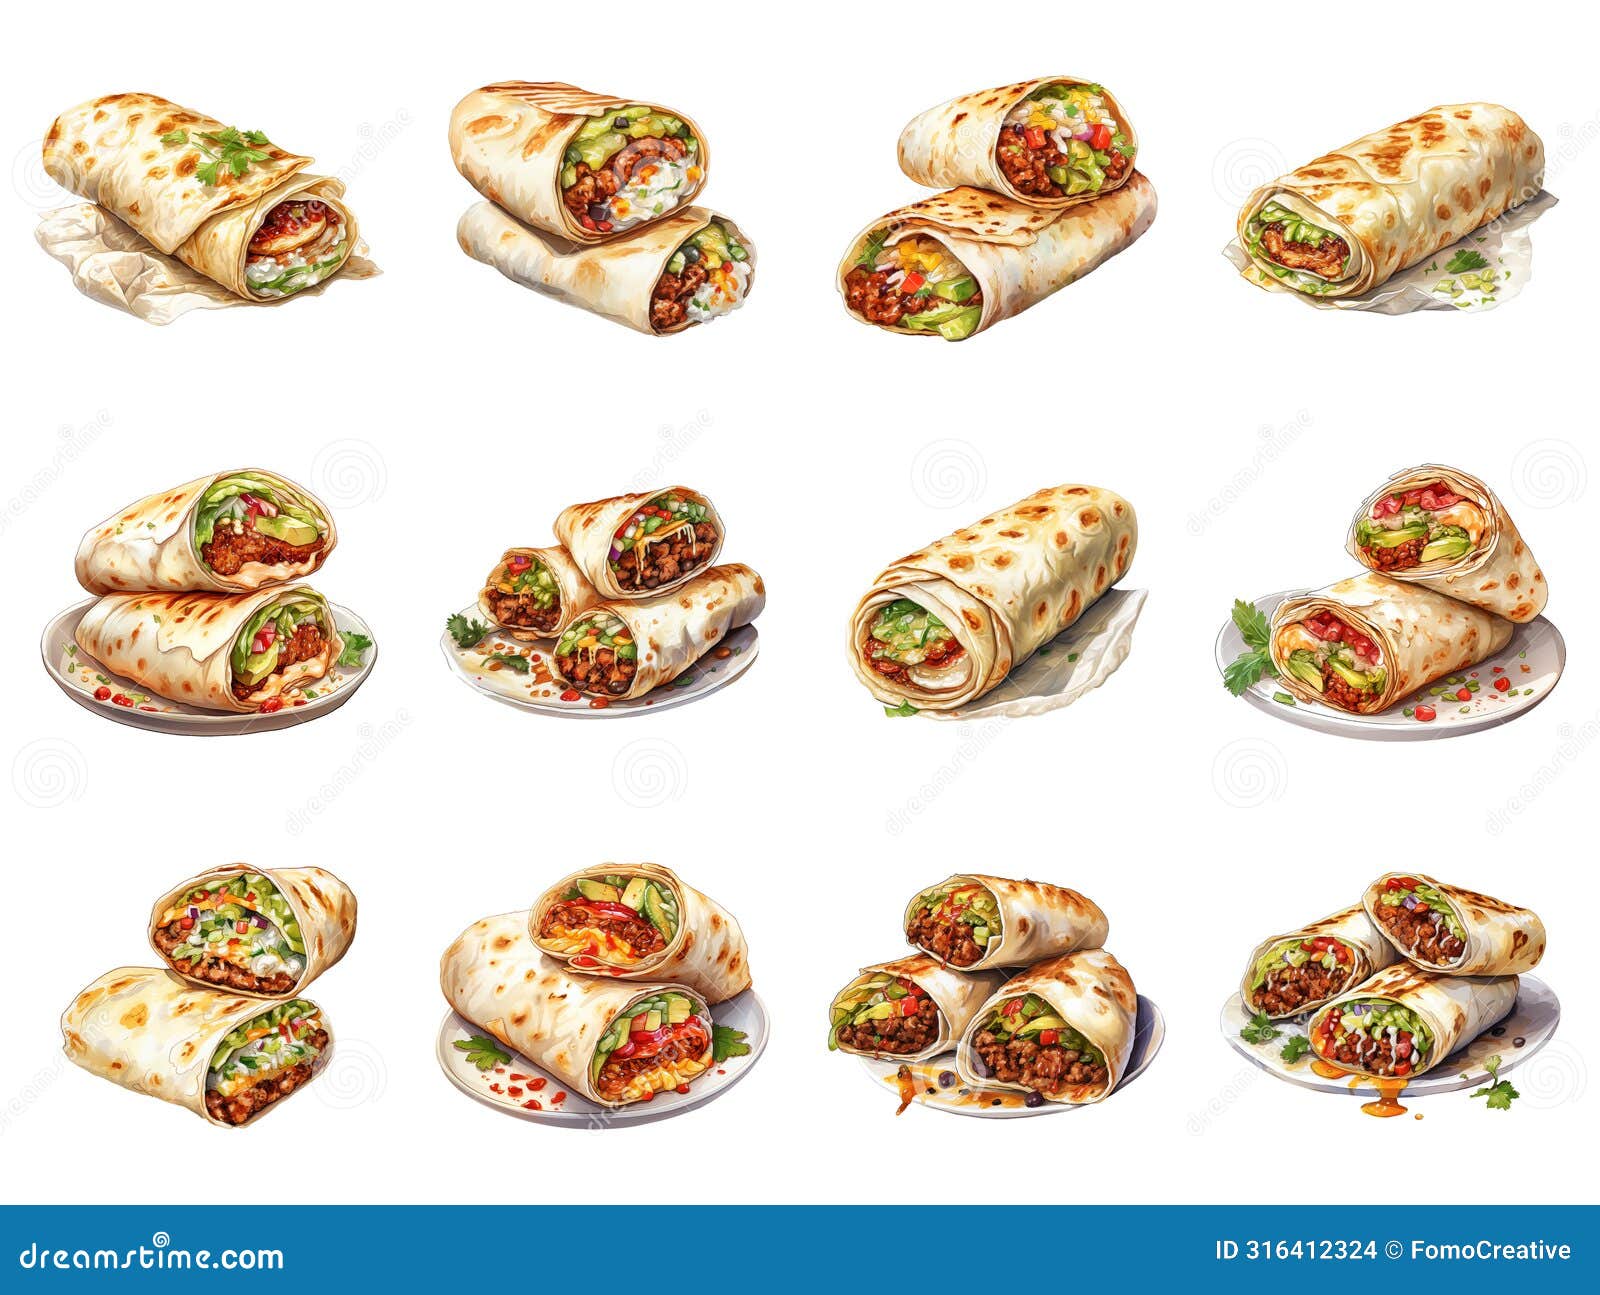 savory burritos wrapped in flavorful tortillas, ready to eat